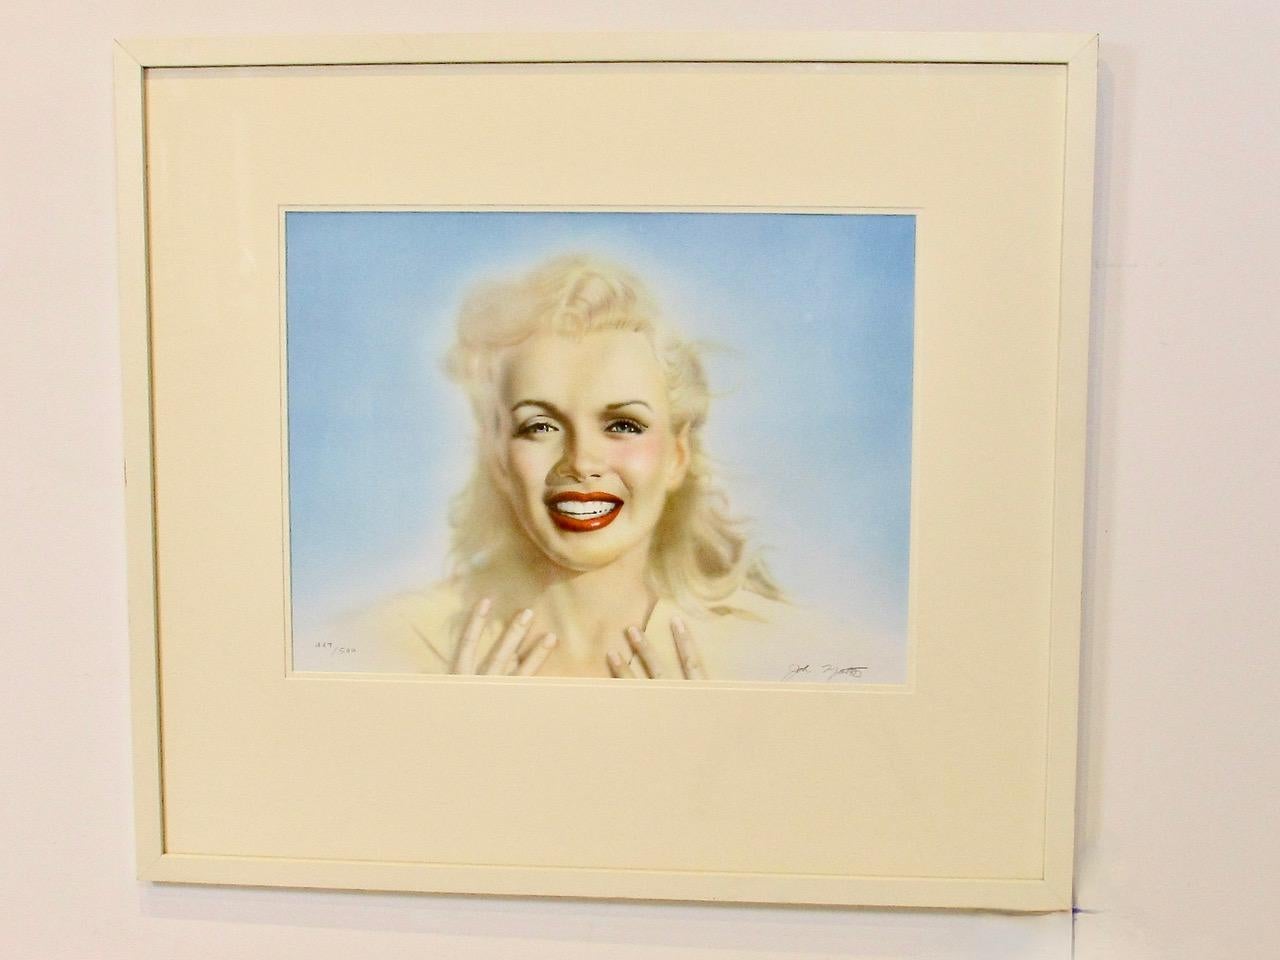 Marilyn Monroe Offset Lithograph Print, Limited Edition by John Mattos In Good Condition For Sale In Ferndale, MI